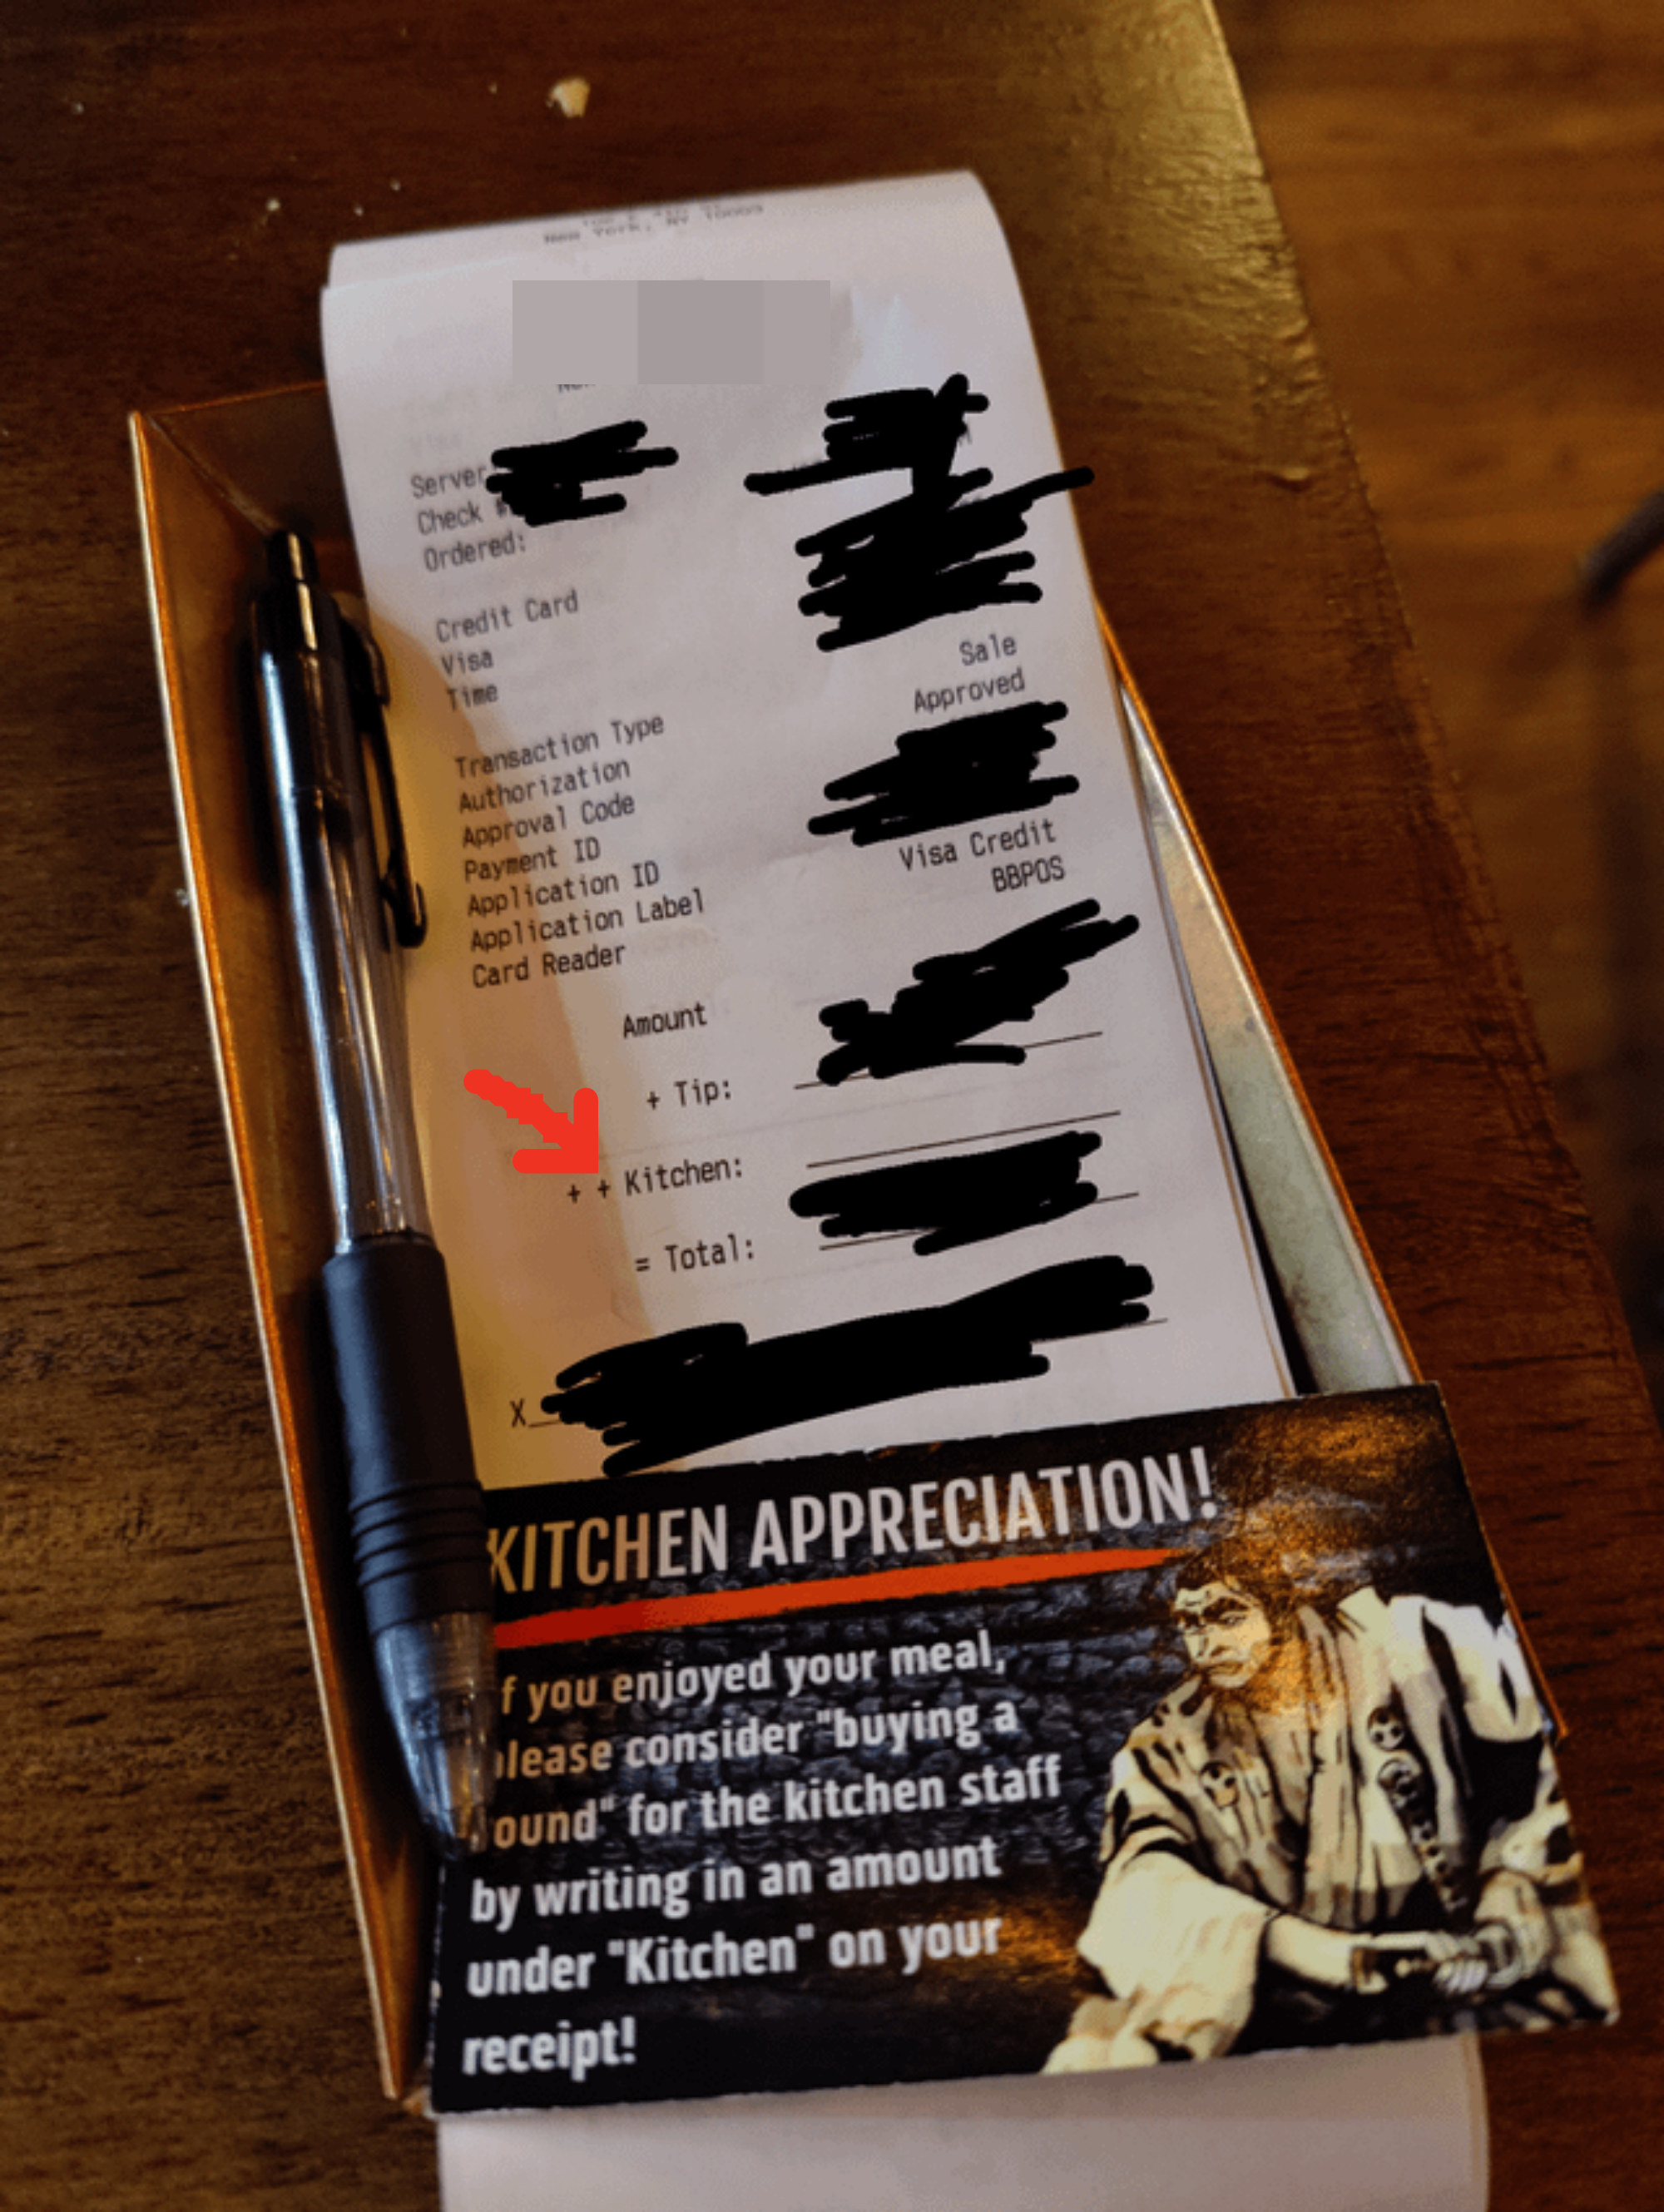 A receipt with a place to tip the kitchen staff